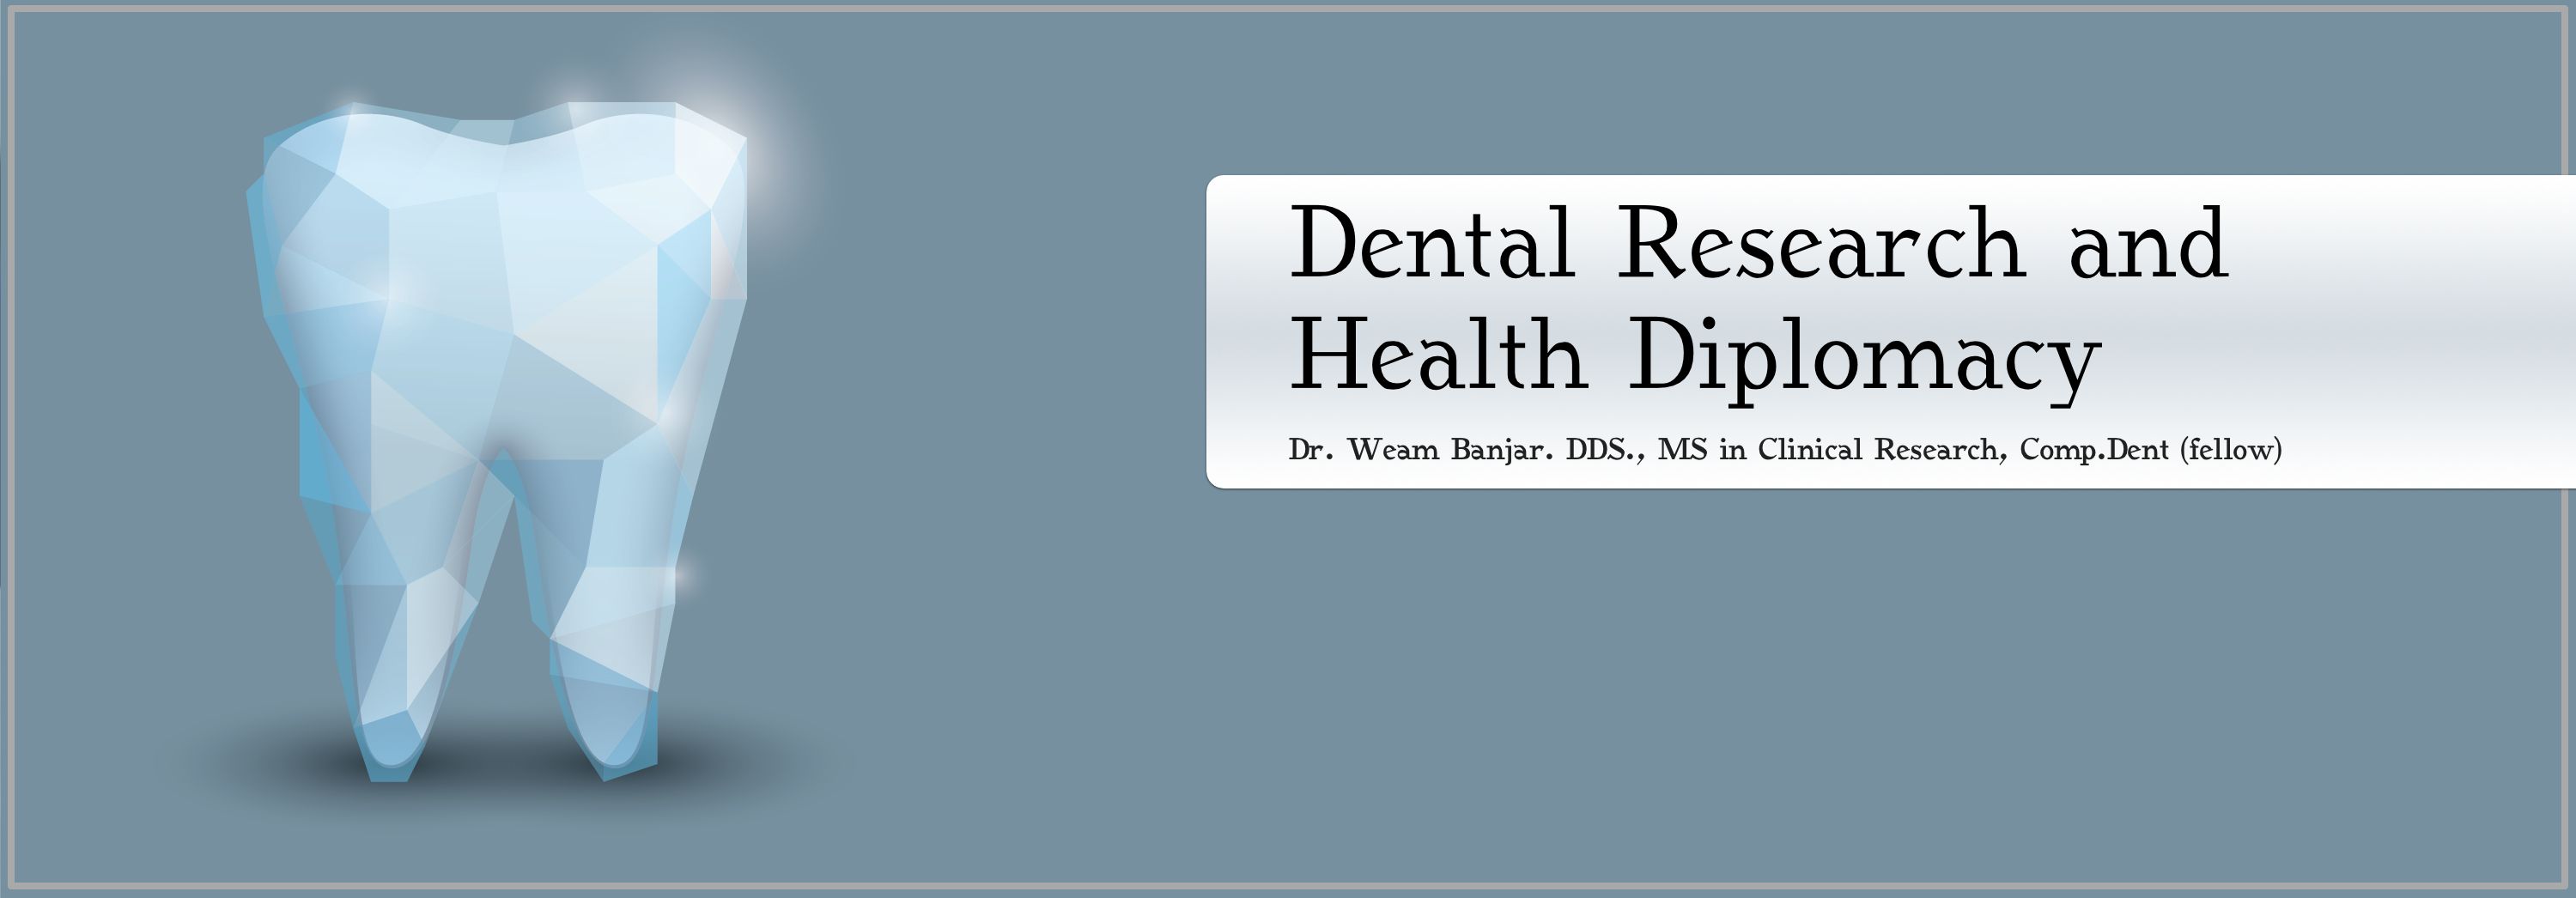 Dental Research and Health Diplomacy